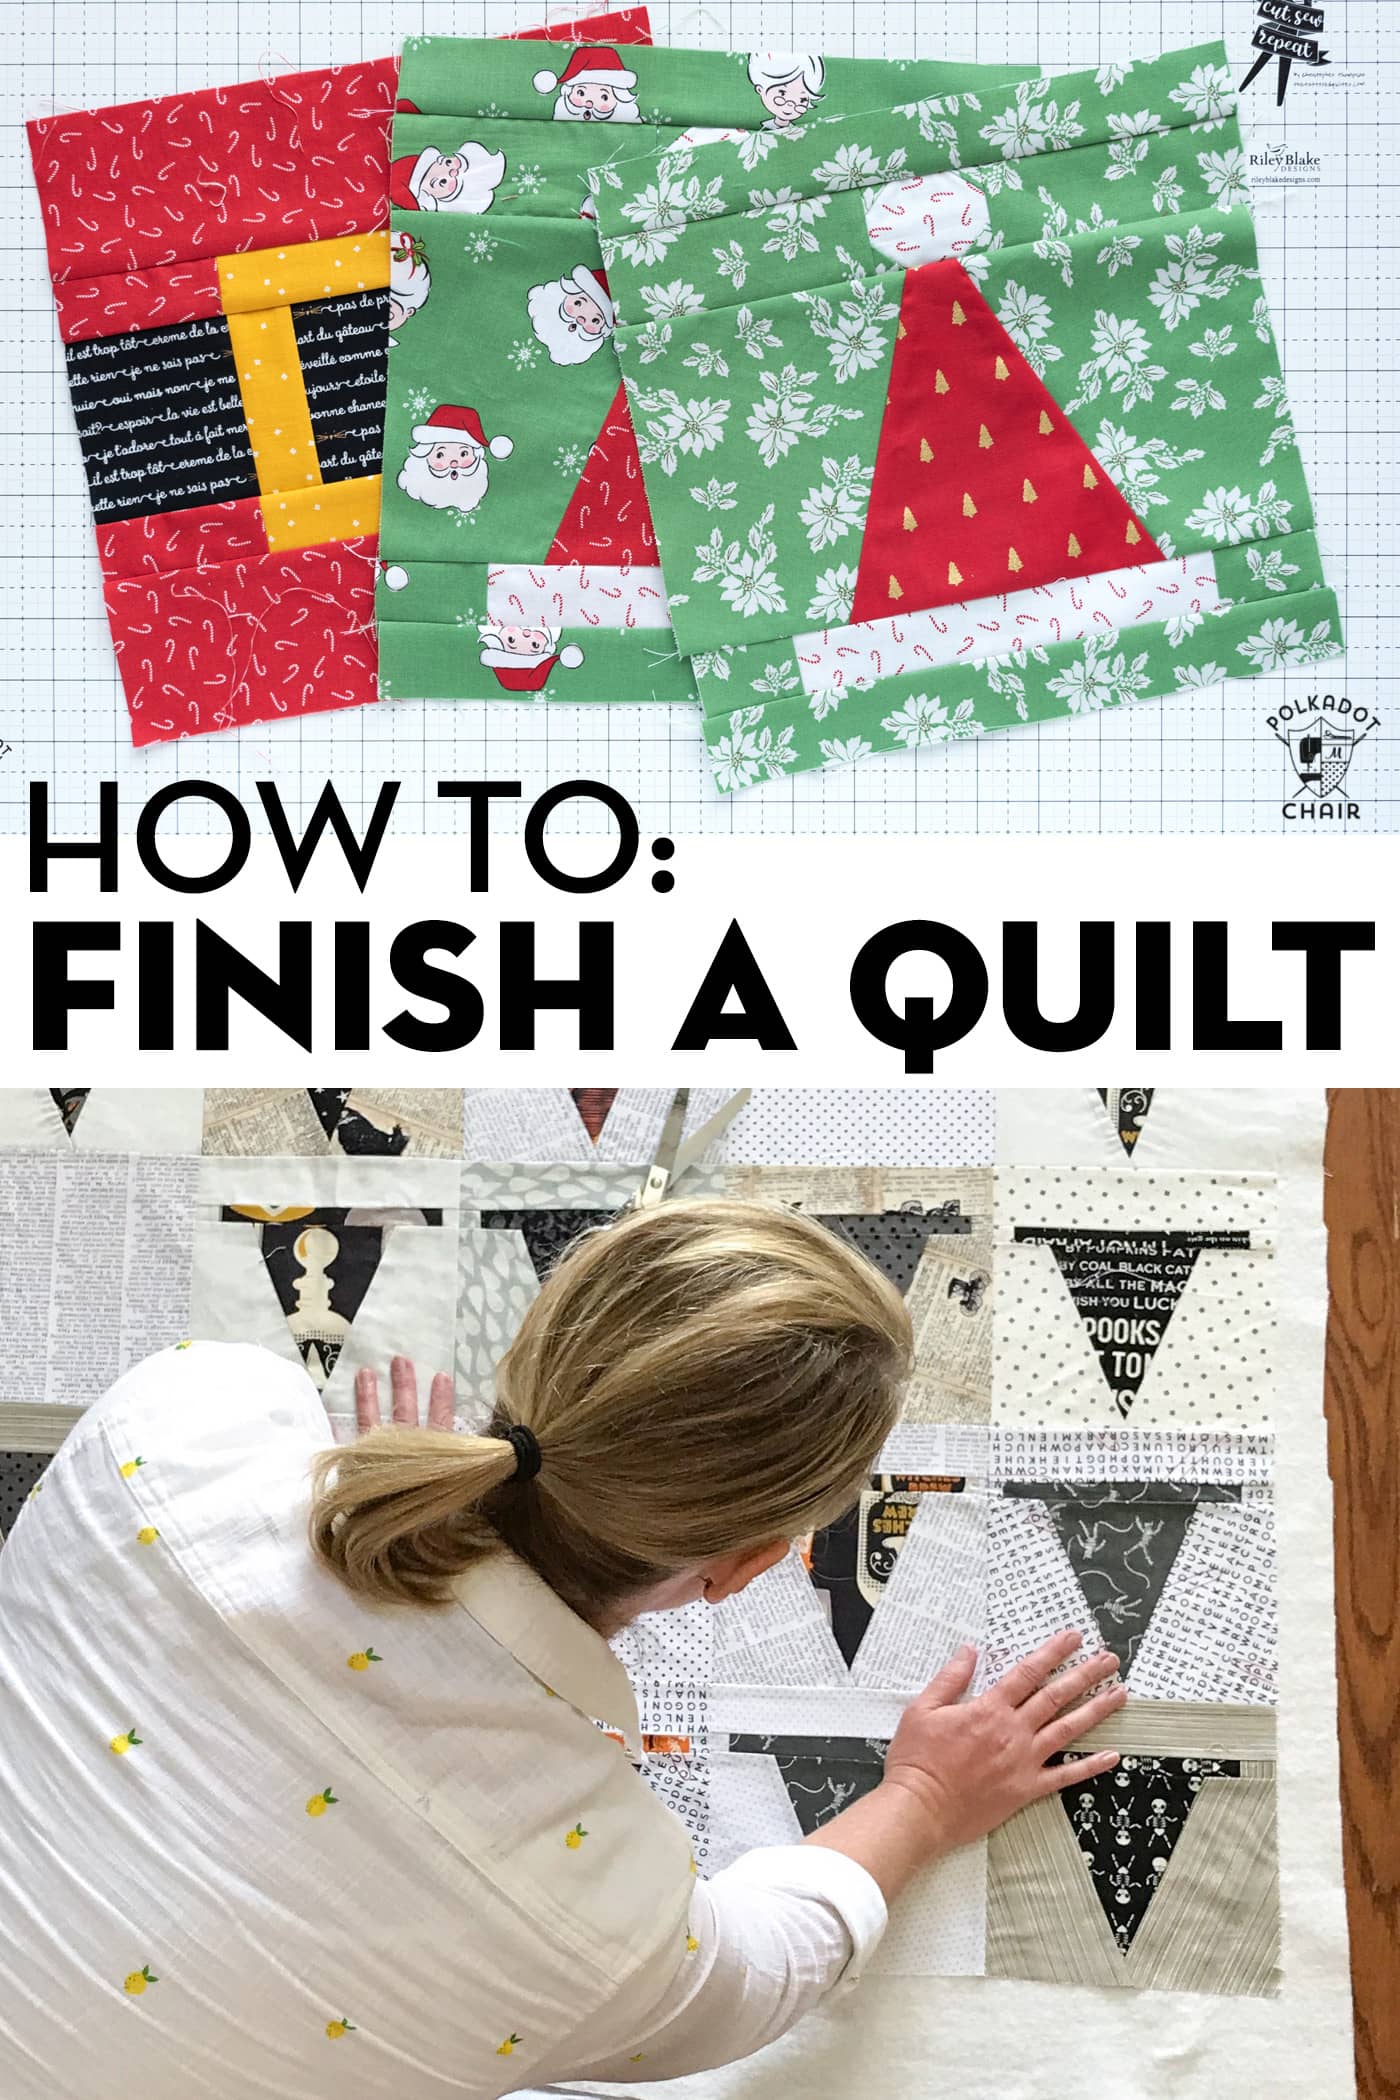 How to Finish a Quilt